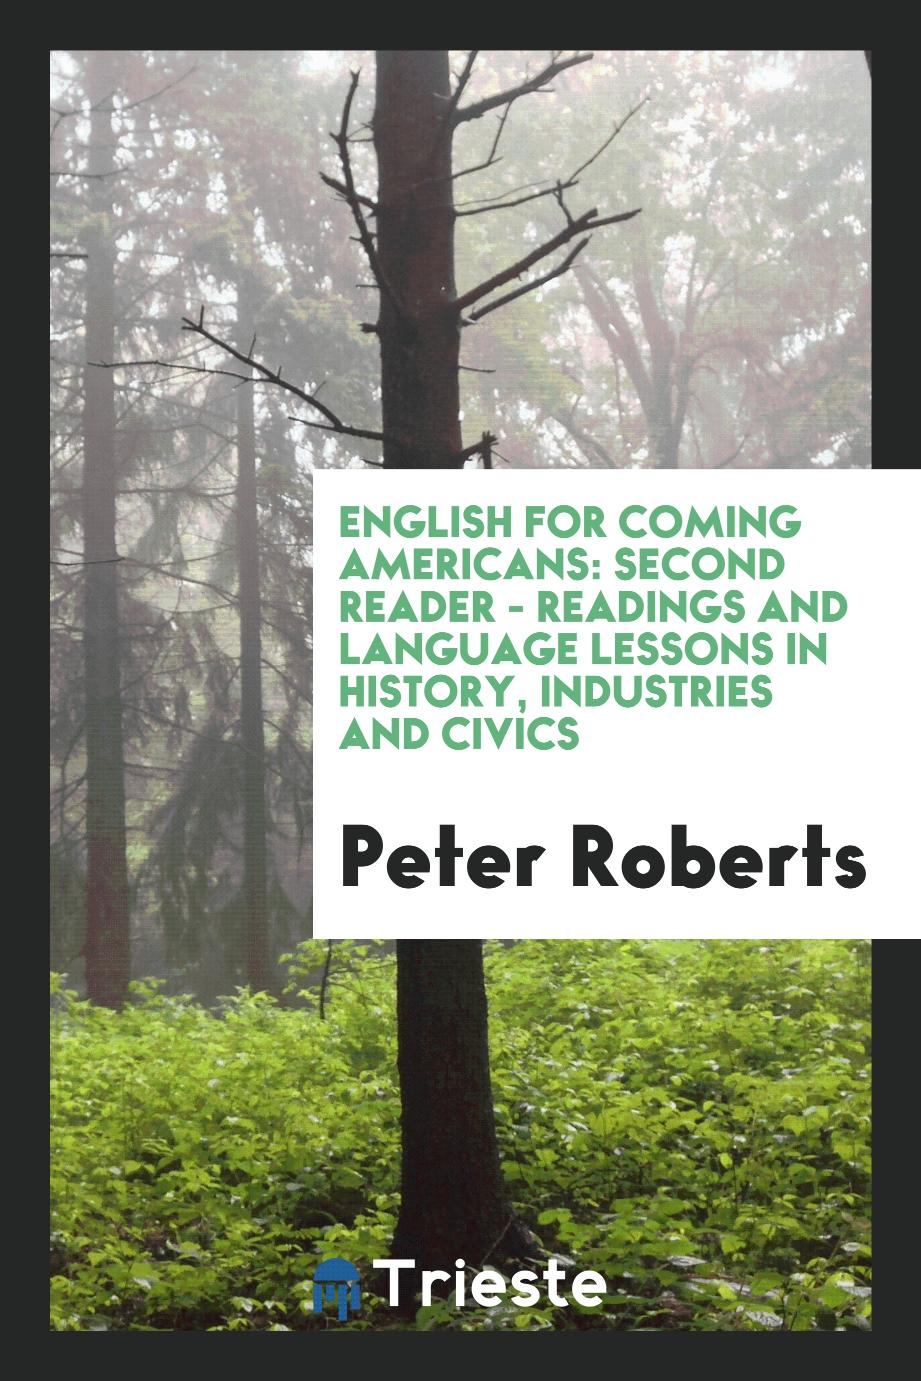 English for Coming Americans: Second Reader - Readings and Language Lessons in History, Industries and Civics